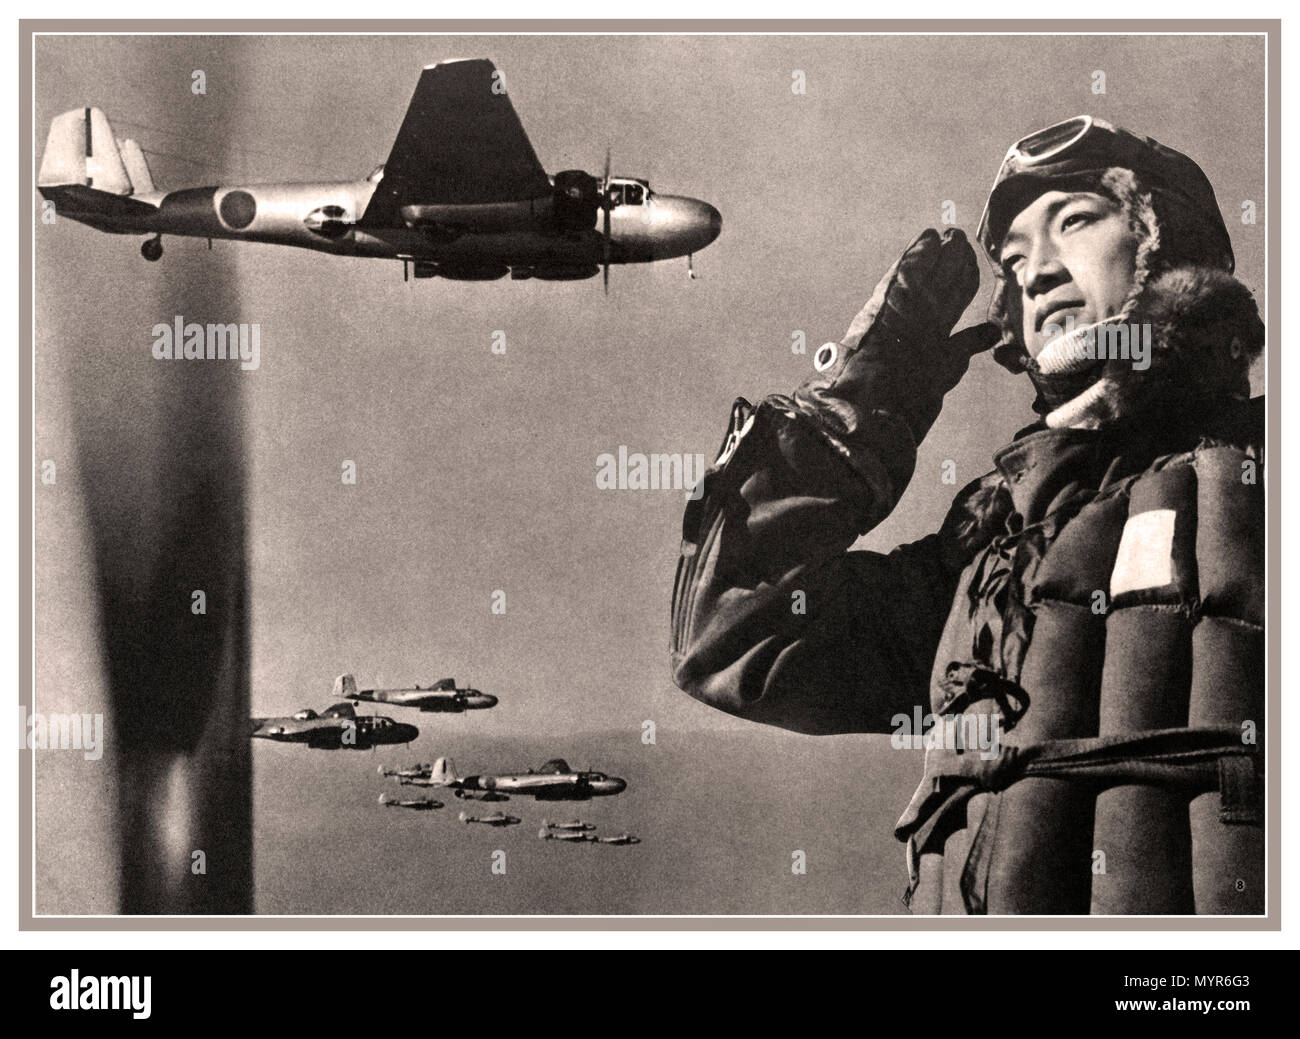 WW2 Japan Propaganda Recruitment Imperial Japanese Navy Pilot Recruitment Poster c.1940's TITLE 'A single strike onward to the destruction of the enemy base'  Pilot salutes departing Japanese military  aircraft Stock Photo